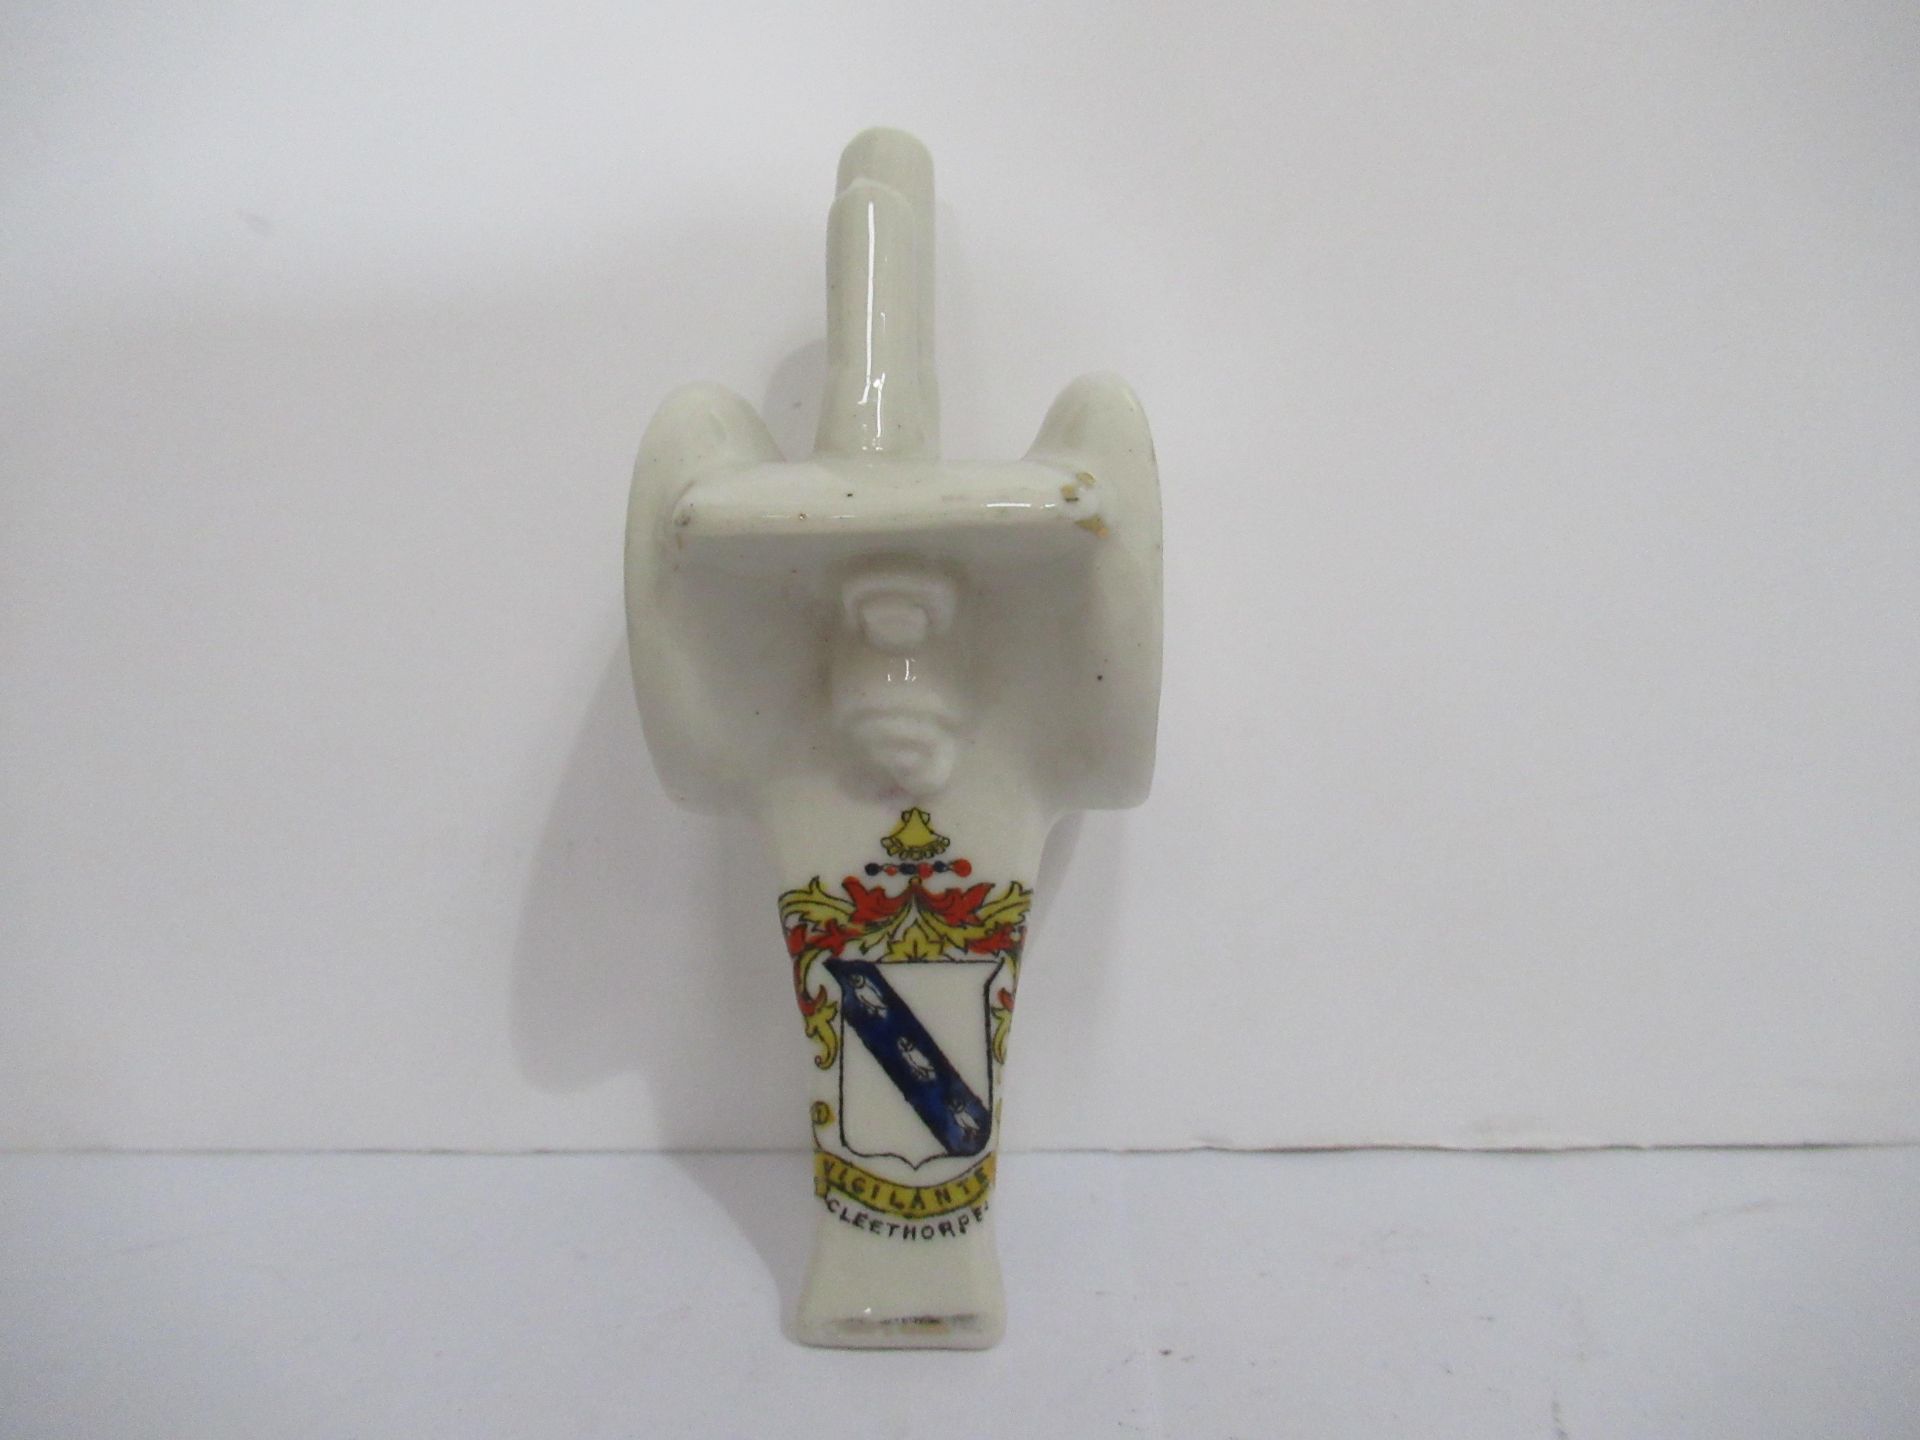 Crested China Waterfall Heraldic model of anti-aircraft gun with Cleethorpes coat of arms - Image 5 of 8